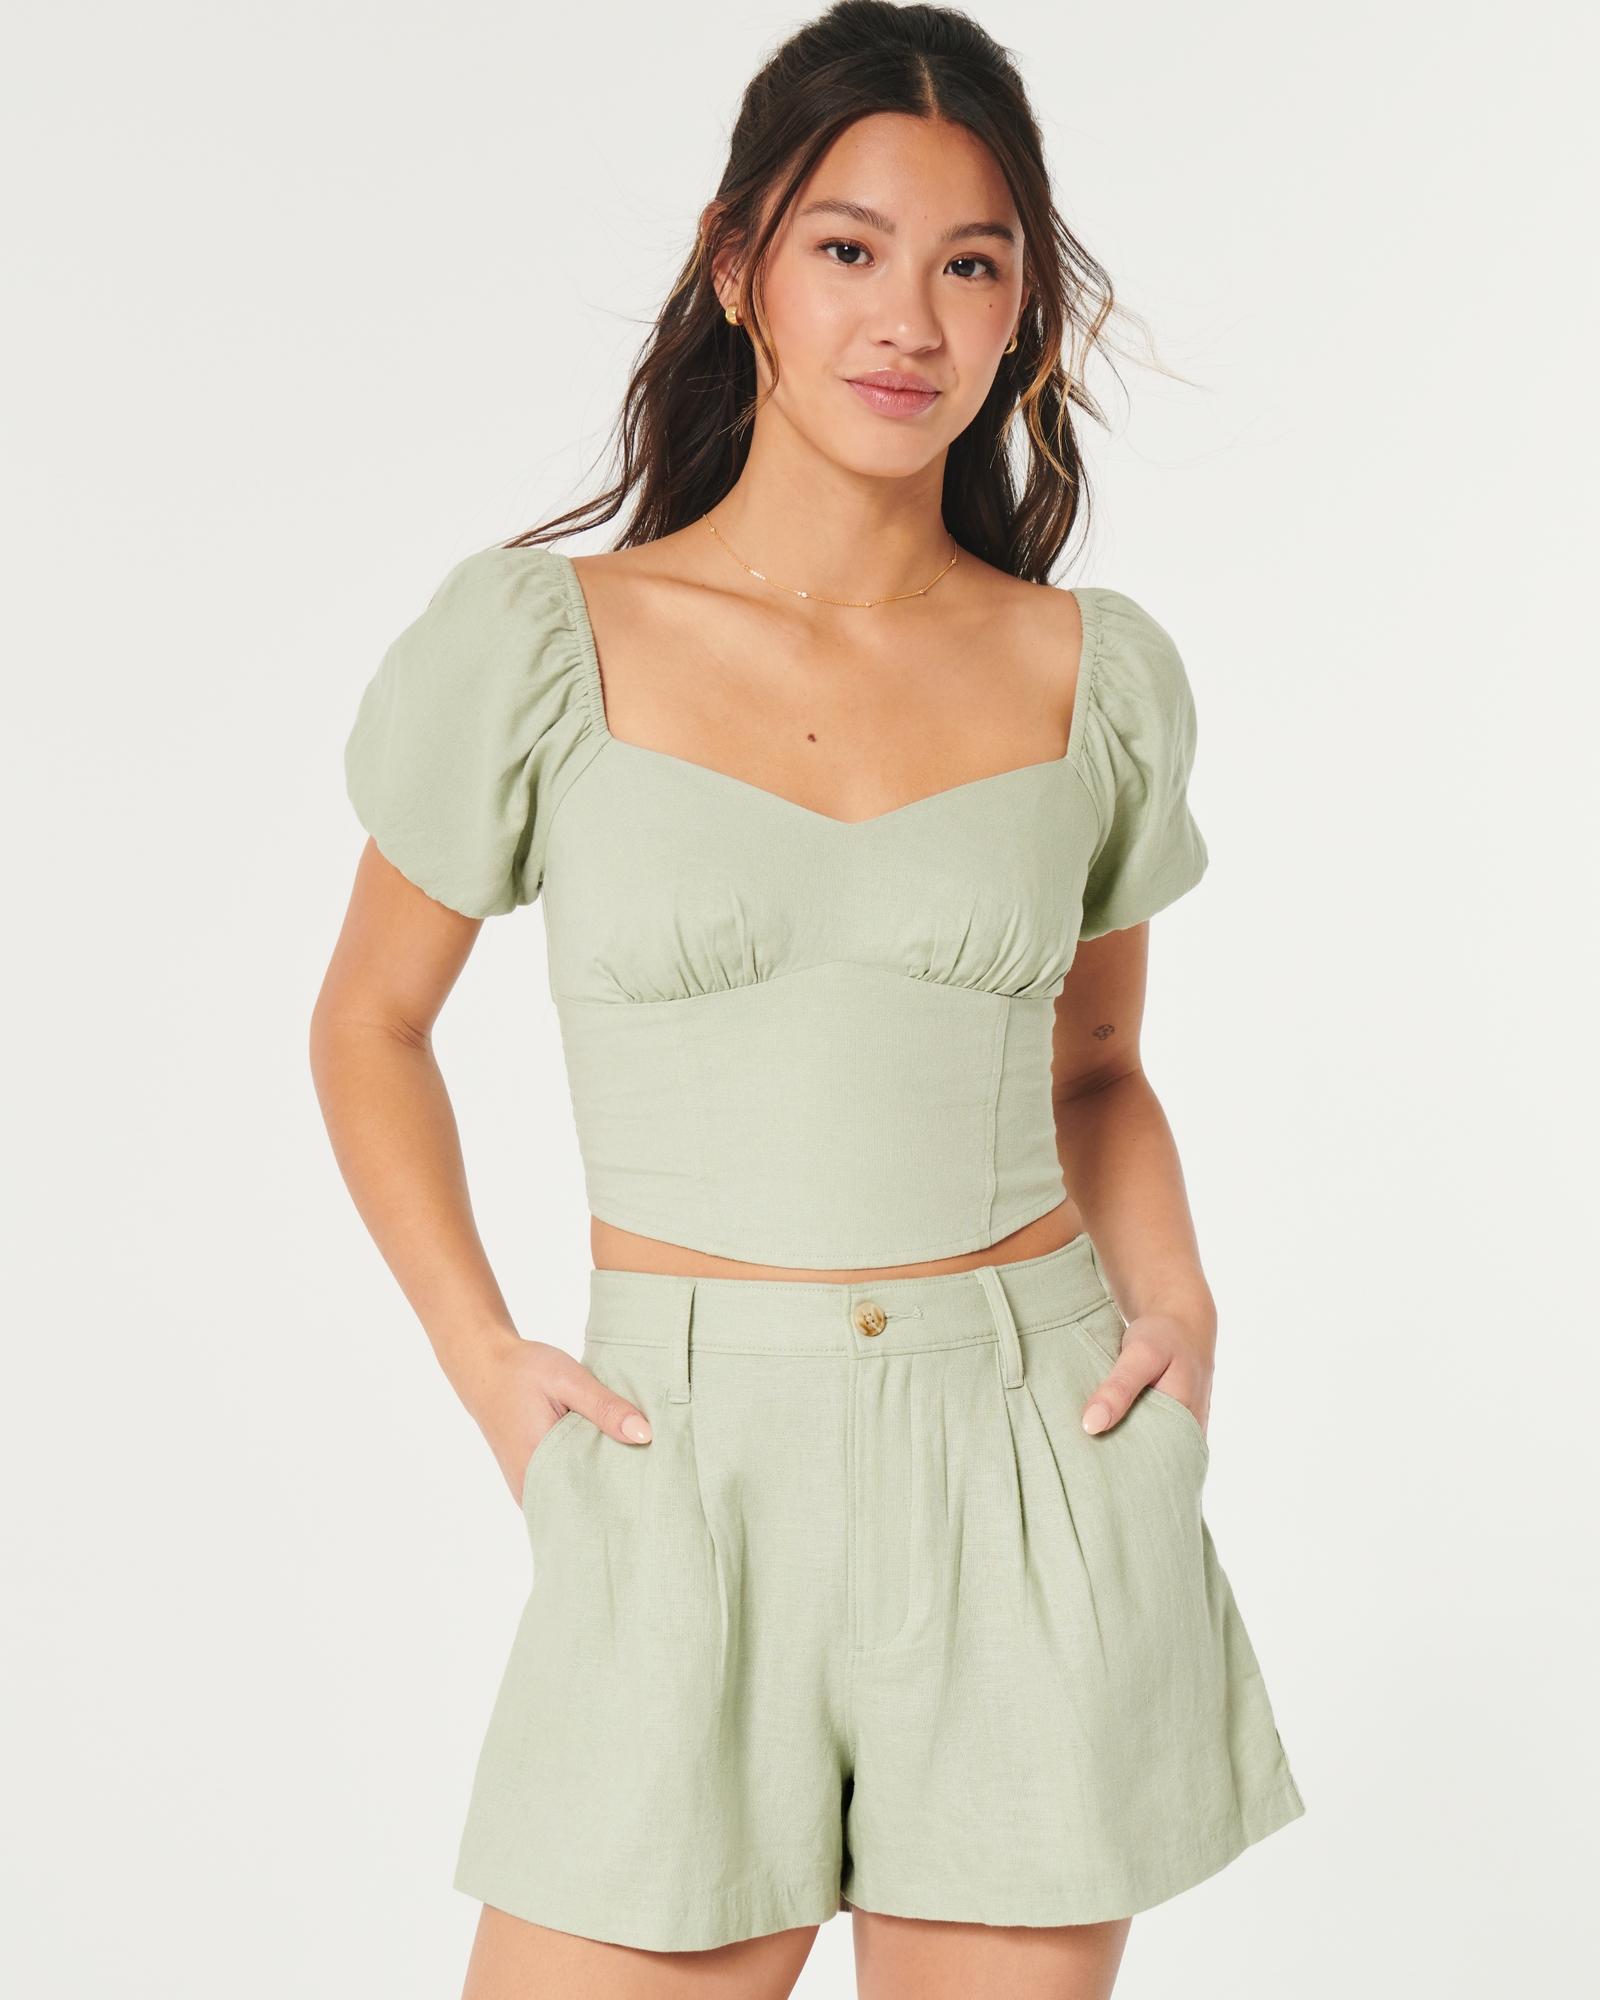 Hollister stretch bustier crop top in green gingham - ShopStyle